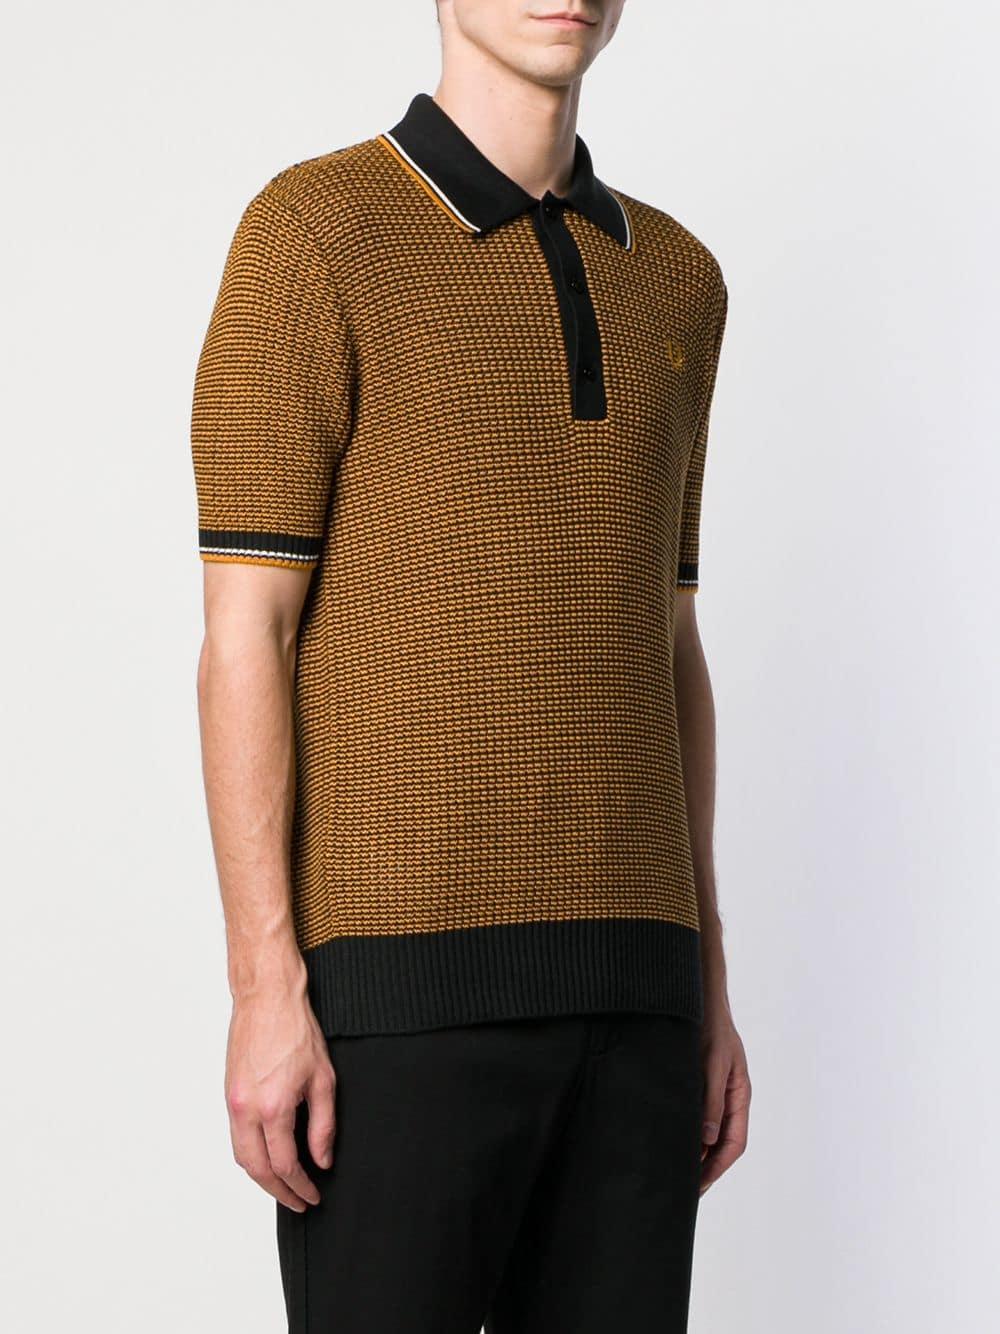 Fred Perry Knitted Polo Shirt in Yellow for Men - Lyst